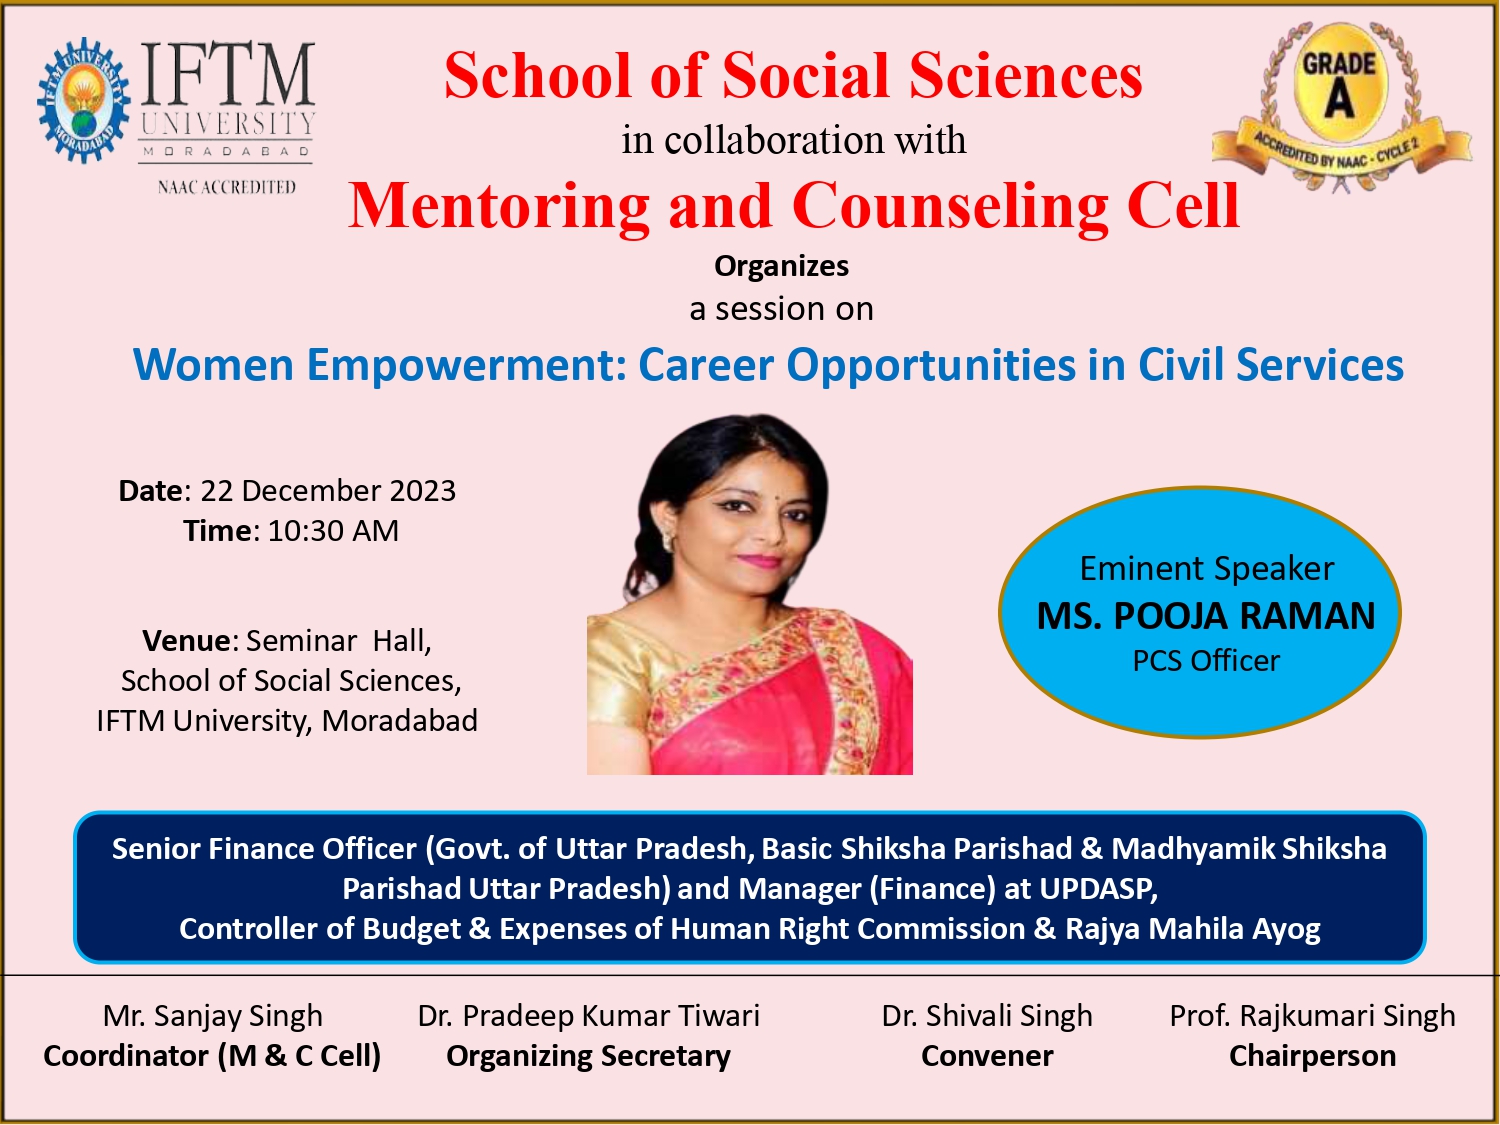 Session on Women Empowerment Career Opportunities in Civil Services